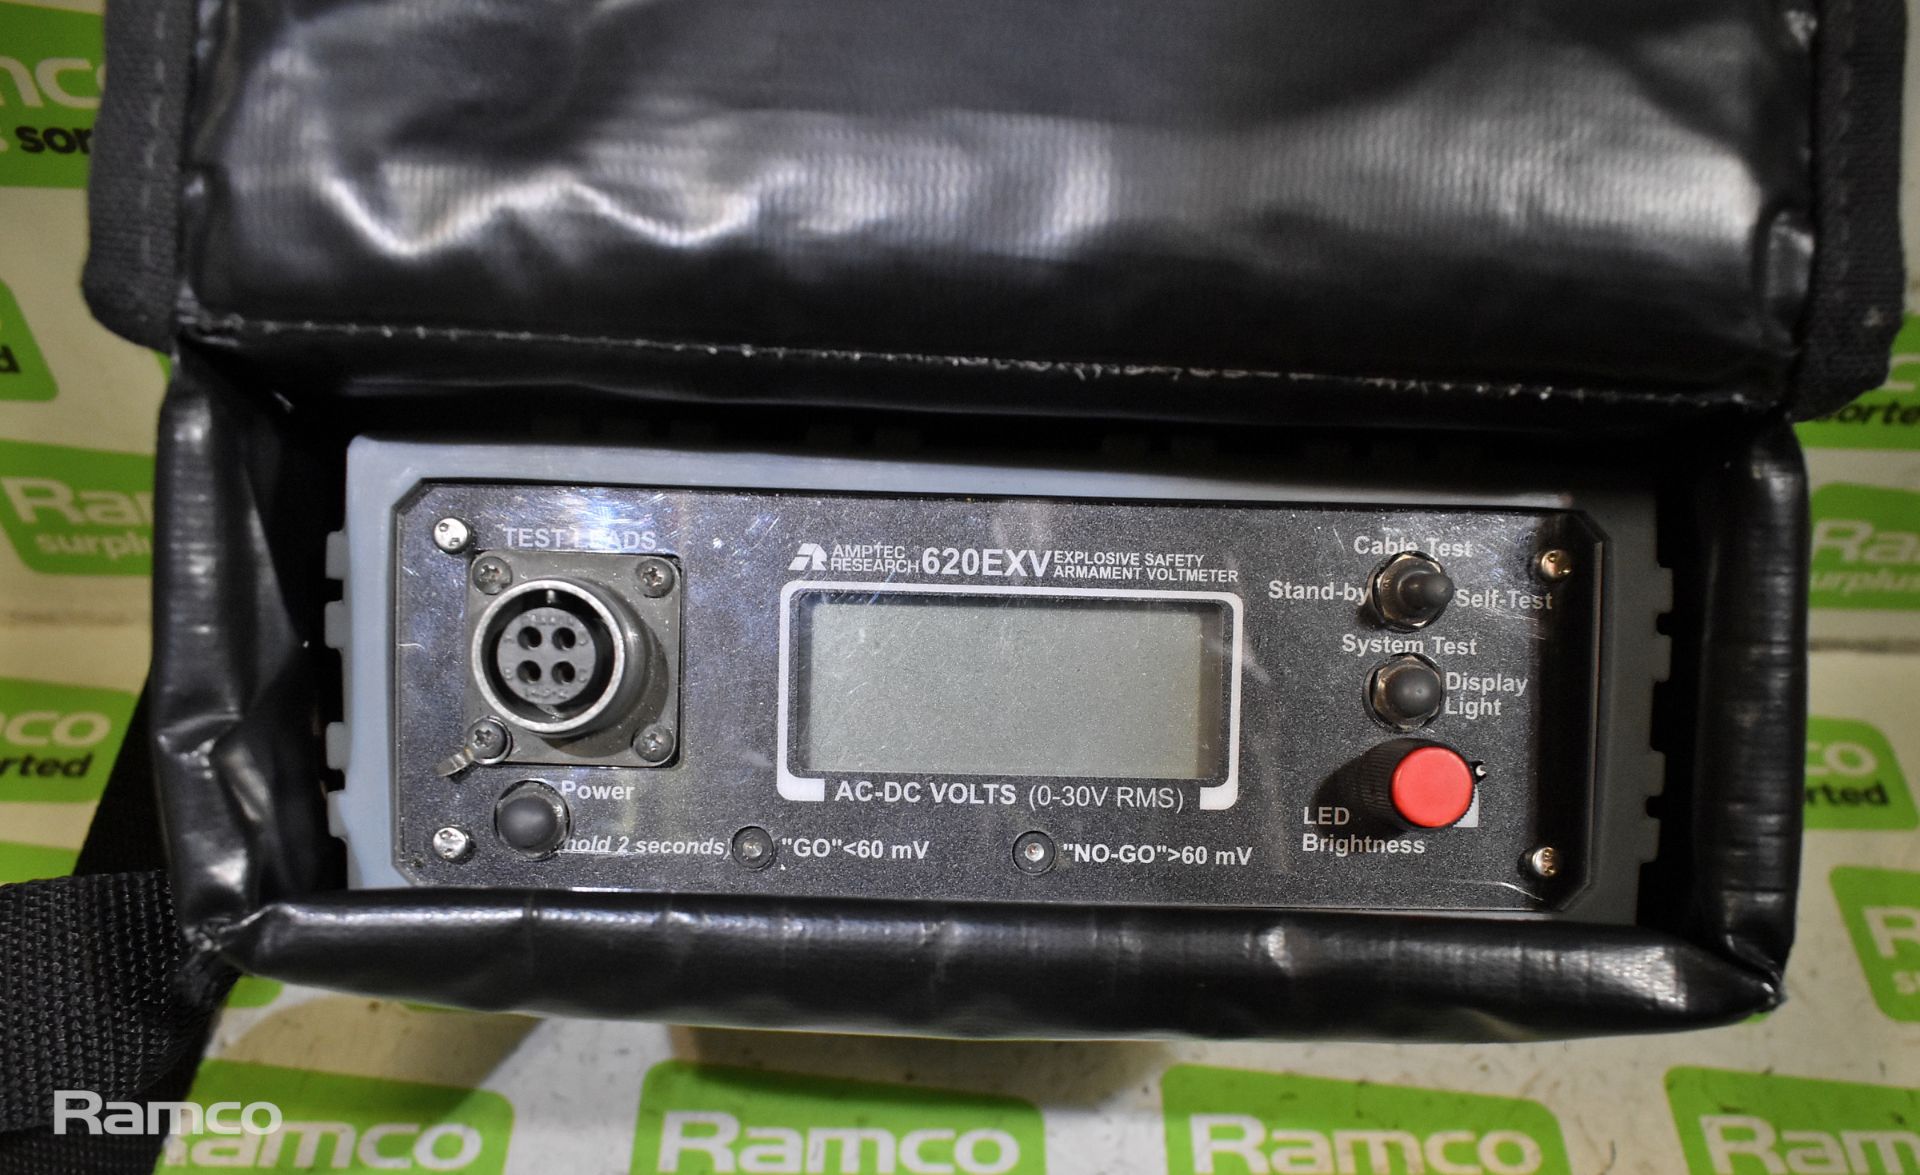 Amptec Research 620EXV explosive safety armament voltmeter - Image 3 of 4